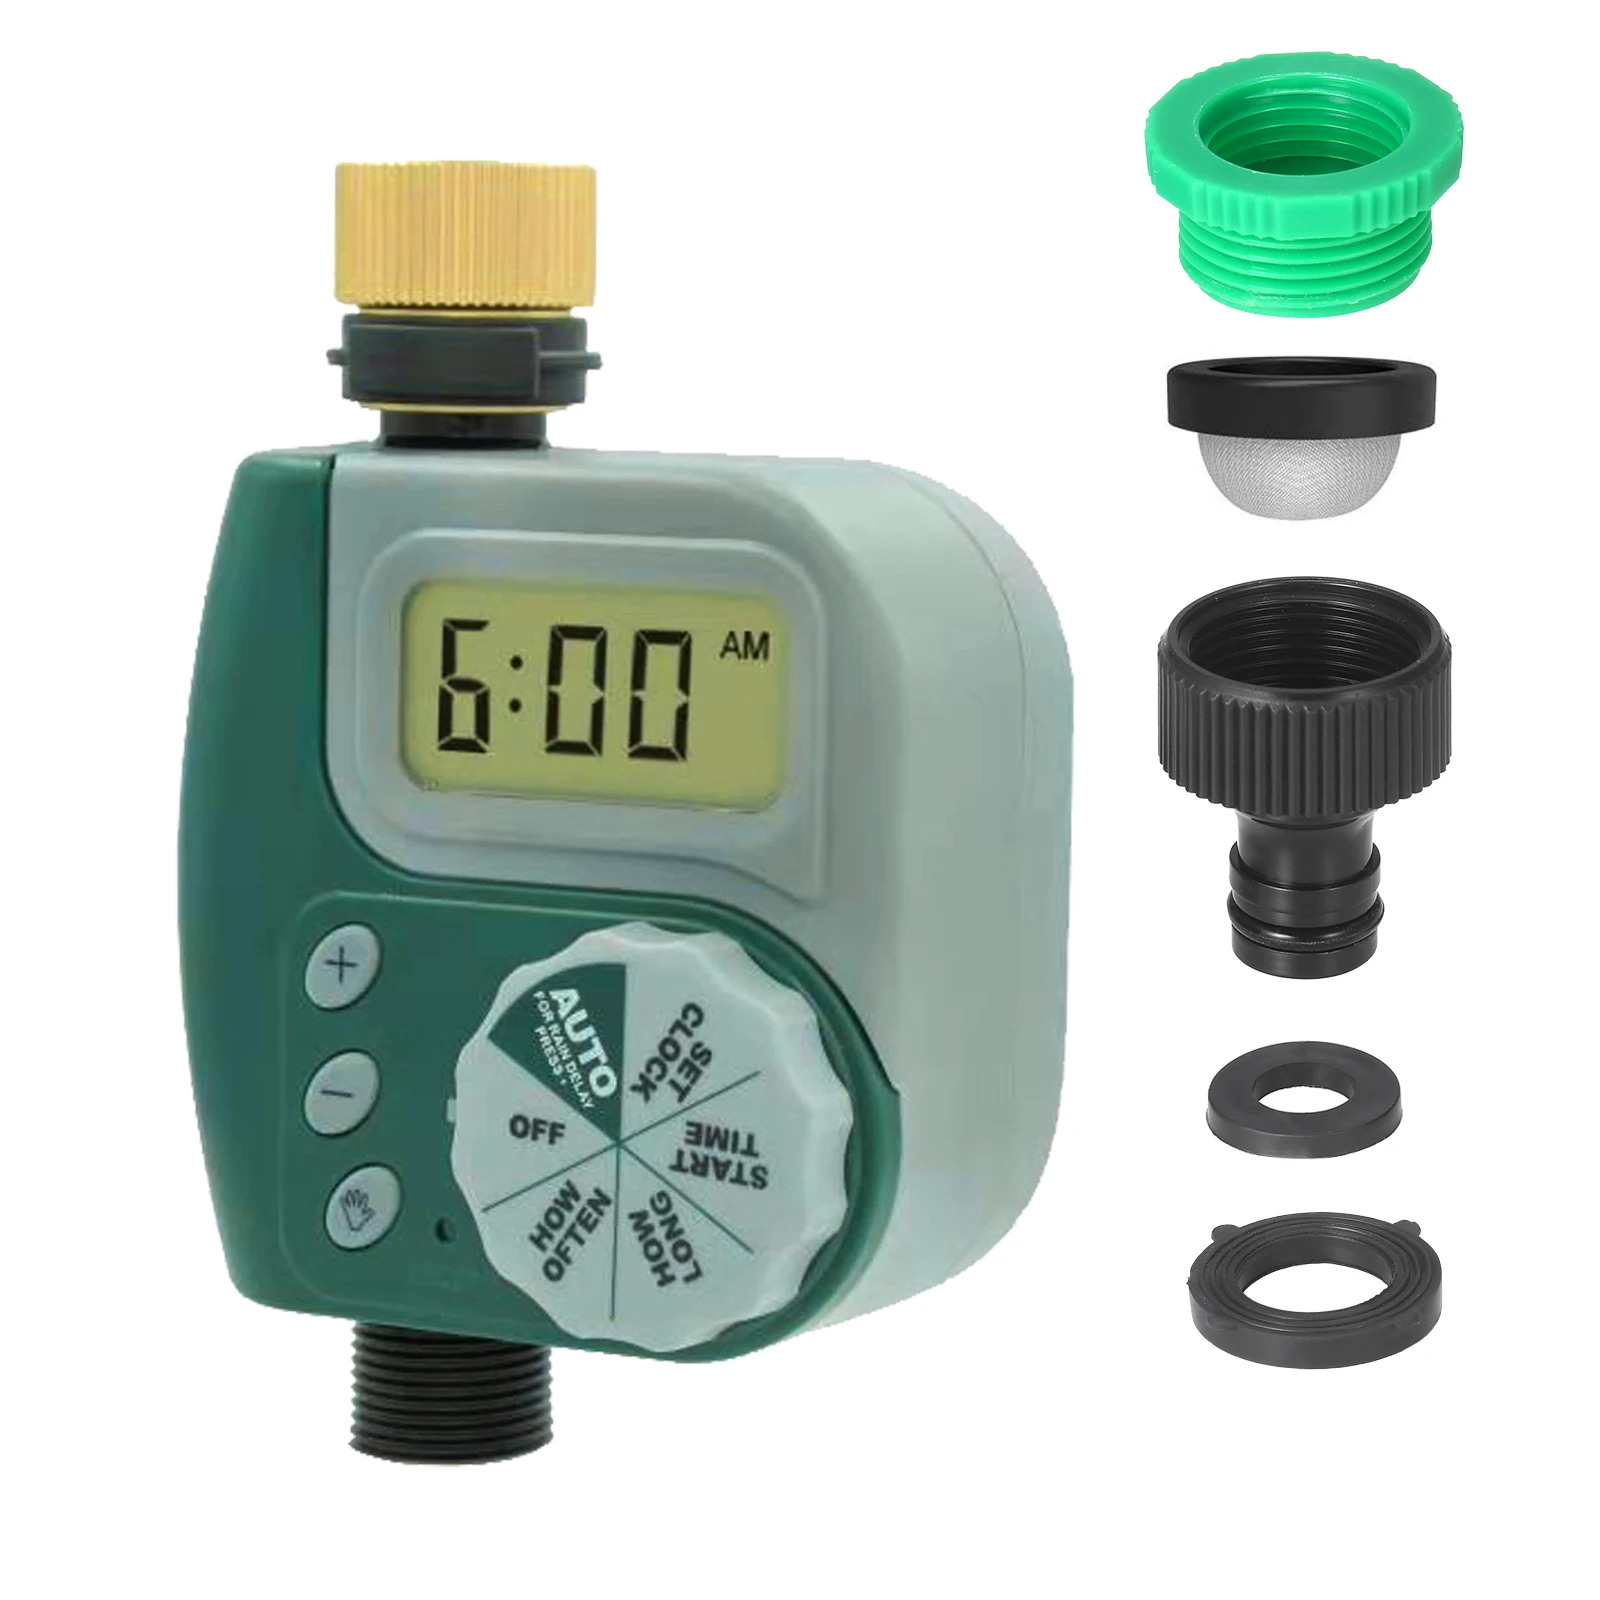 Outdoor Garden Irrigation Controller,Automatic Smart Intelligence Watering Kits，for Garden and Lawn Battery Operated Single Outlet Hose Faucet Timer with Large Digital Display wameay Sprinkler Timer 